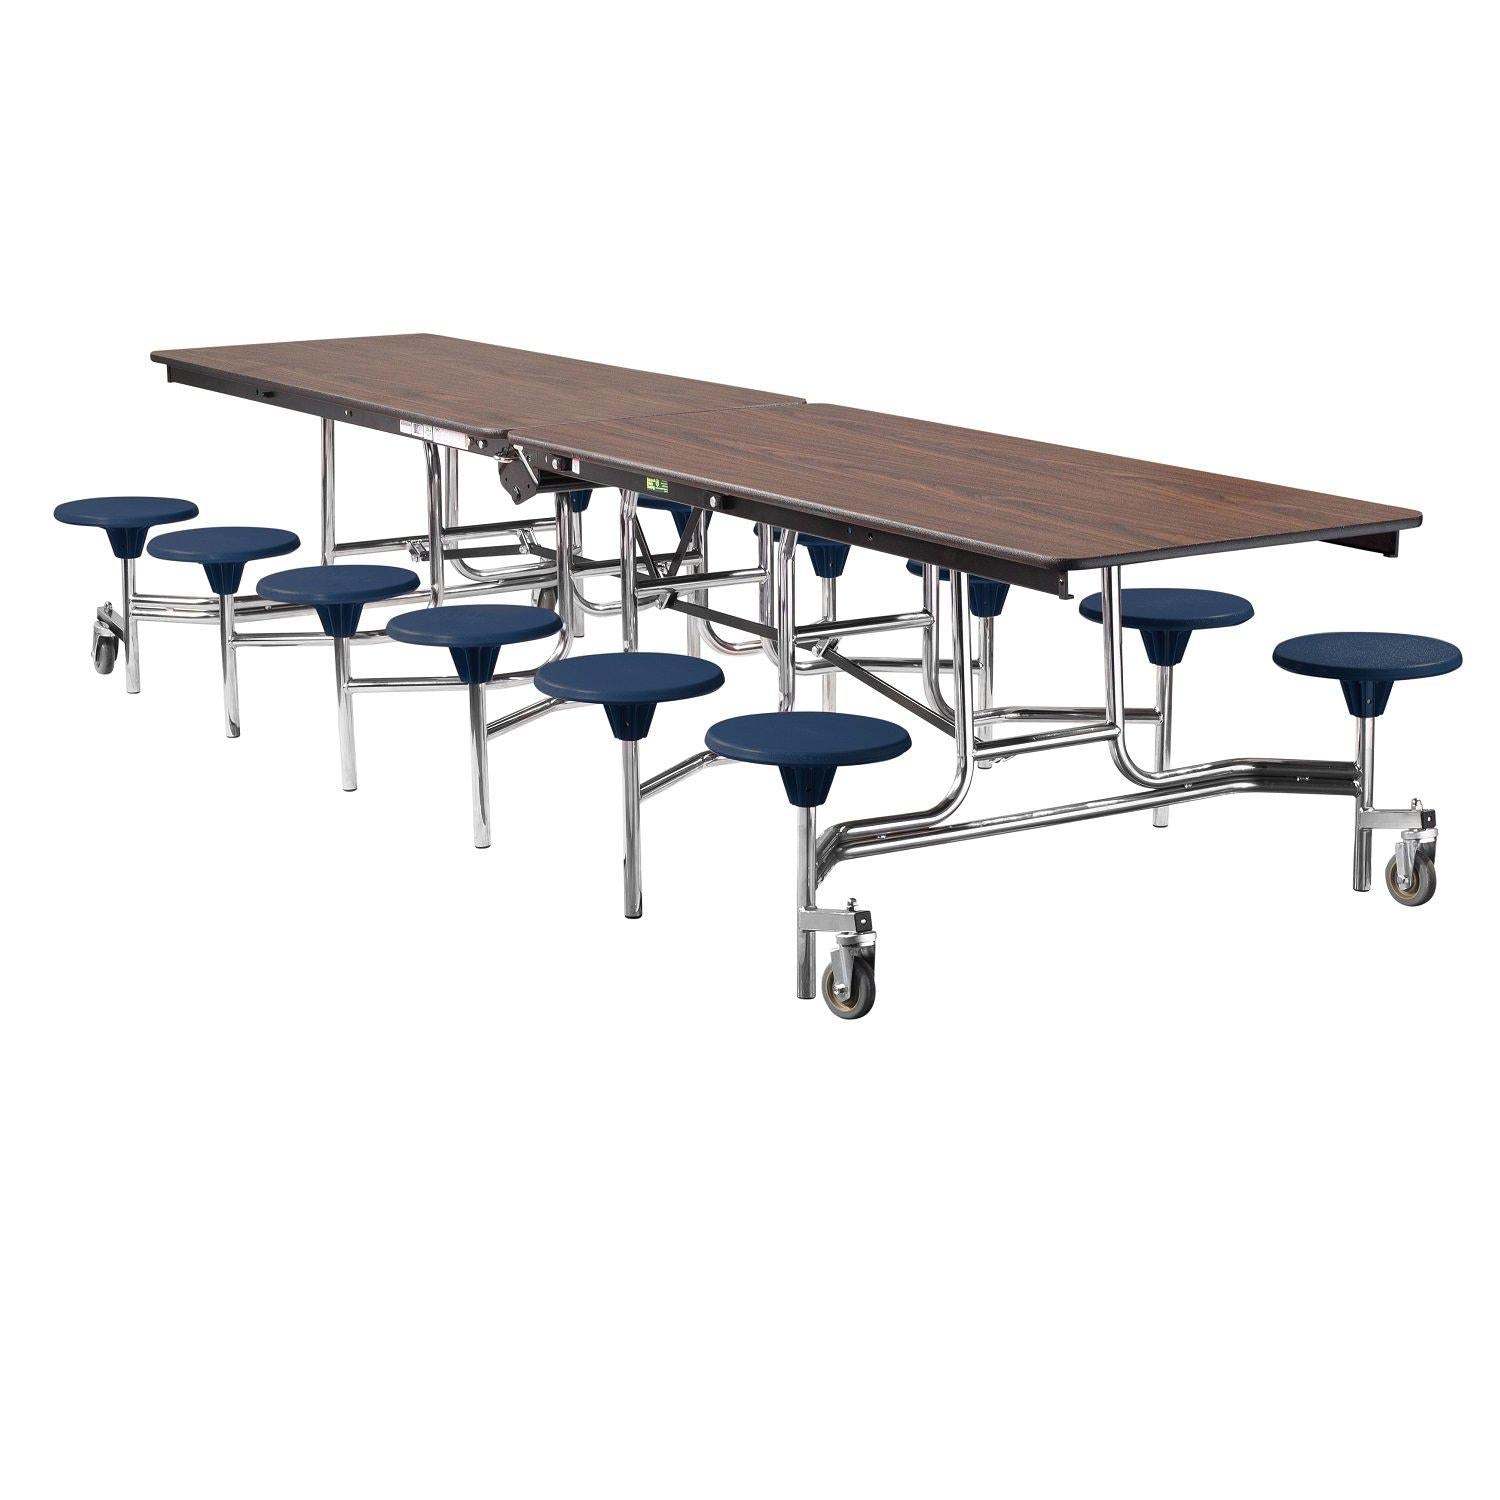 Mobile Cafeteria Table with 12 Stools, 12'L Rectangular, Particleboard Core, Vinyl T-Mold Edge, Chrome Frame